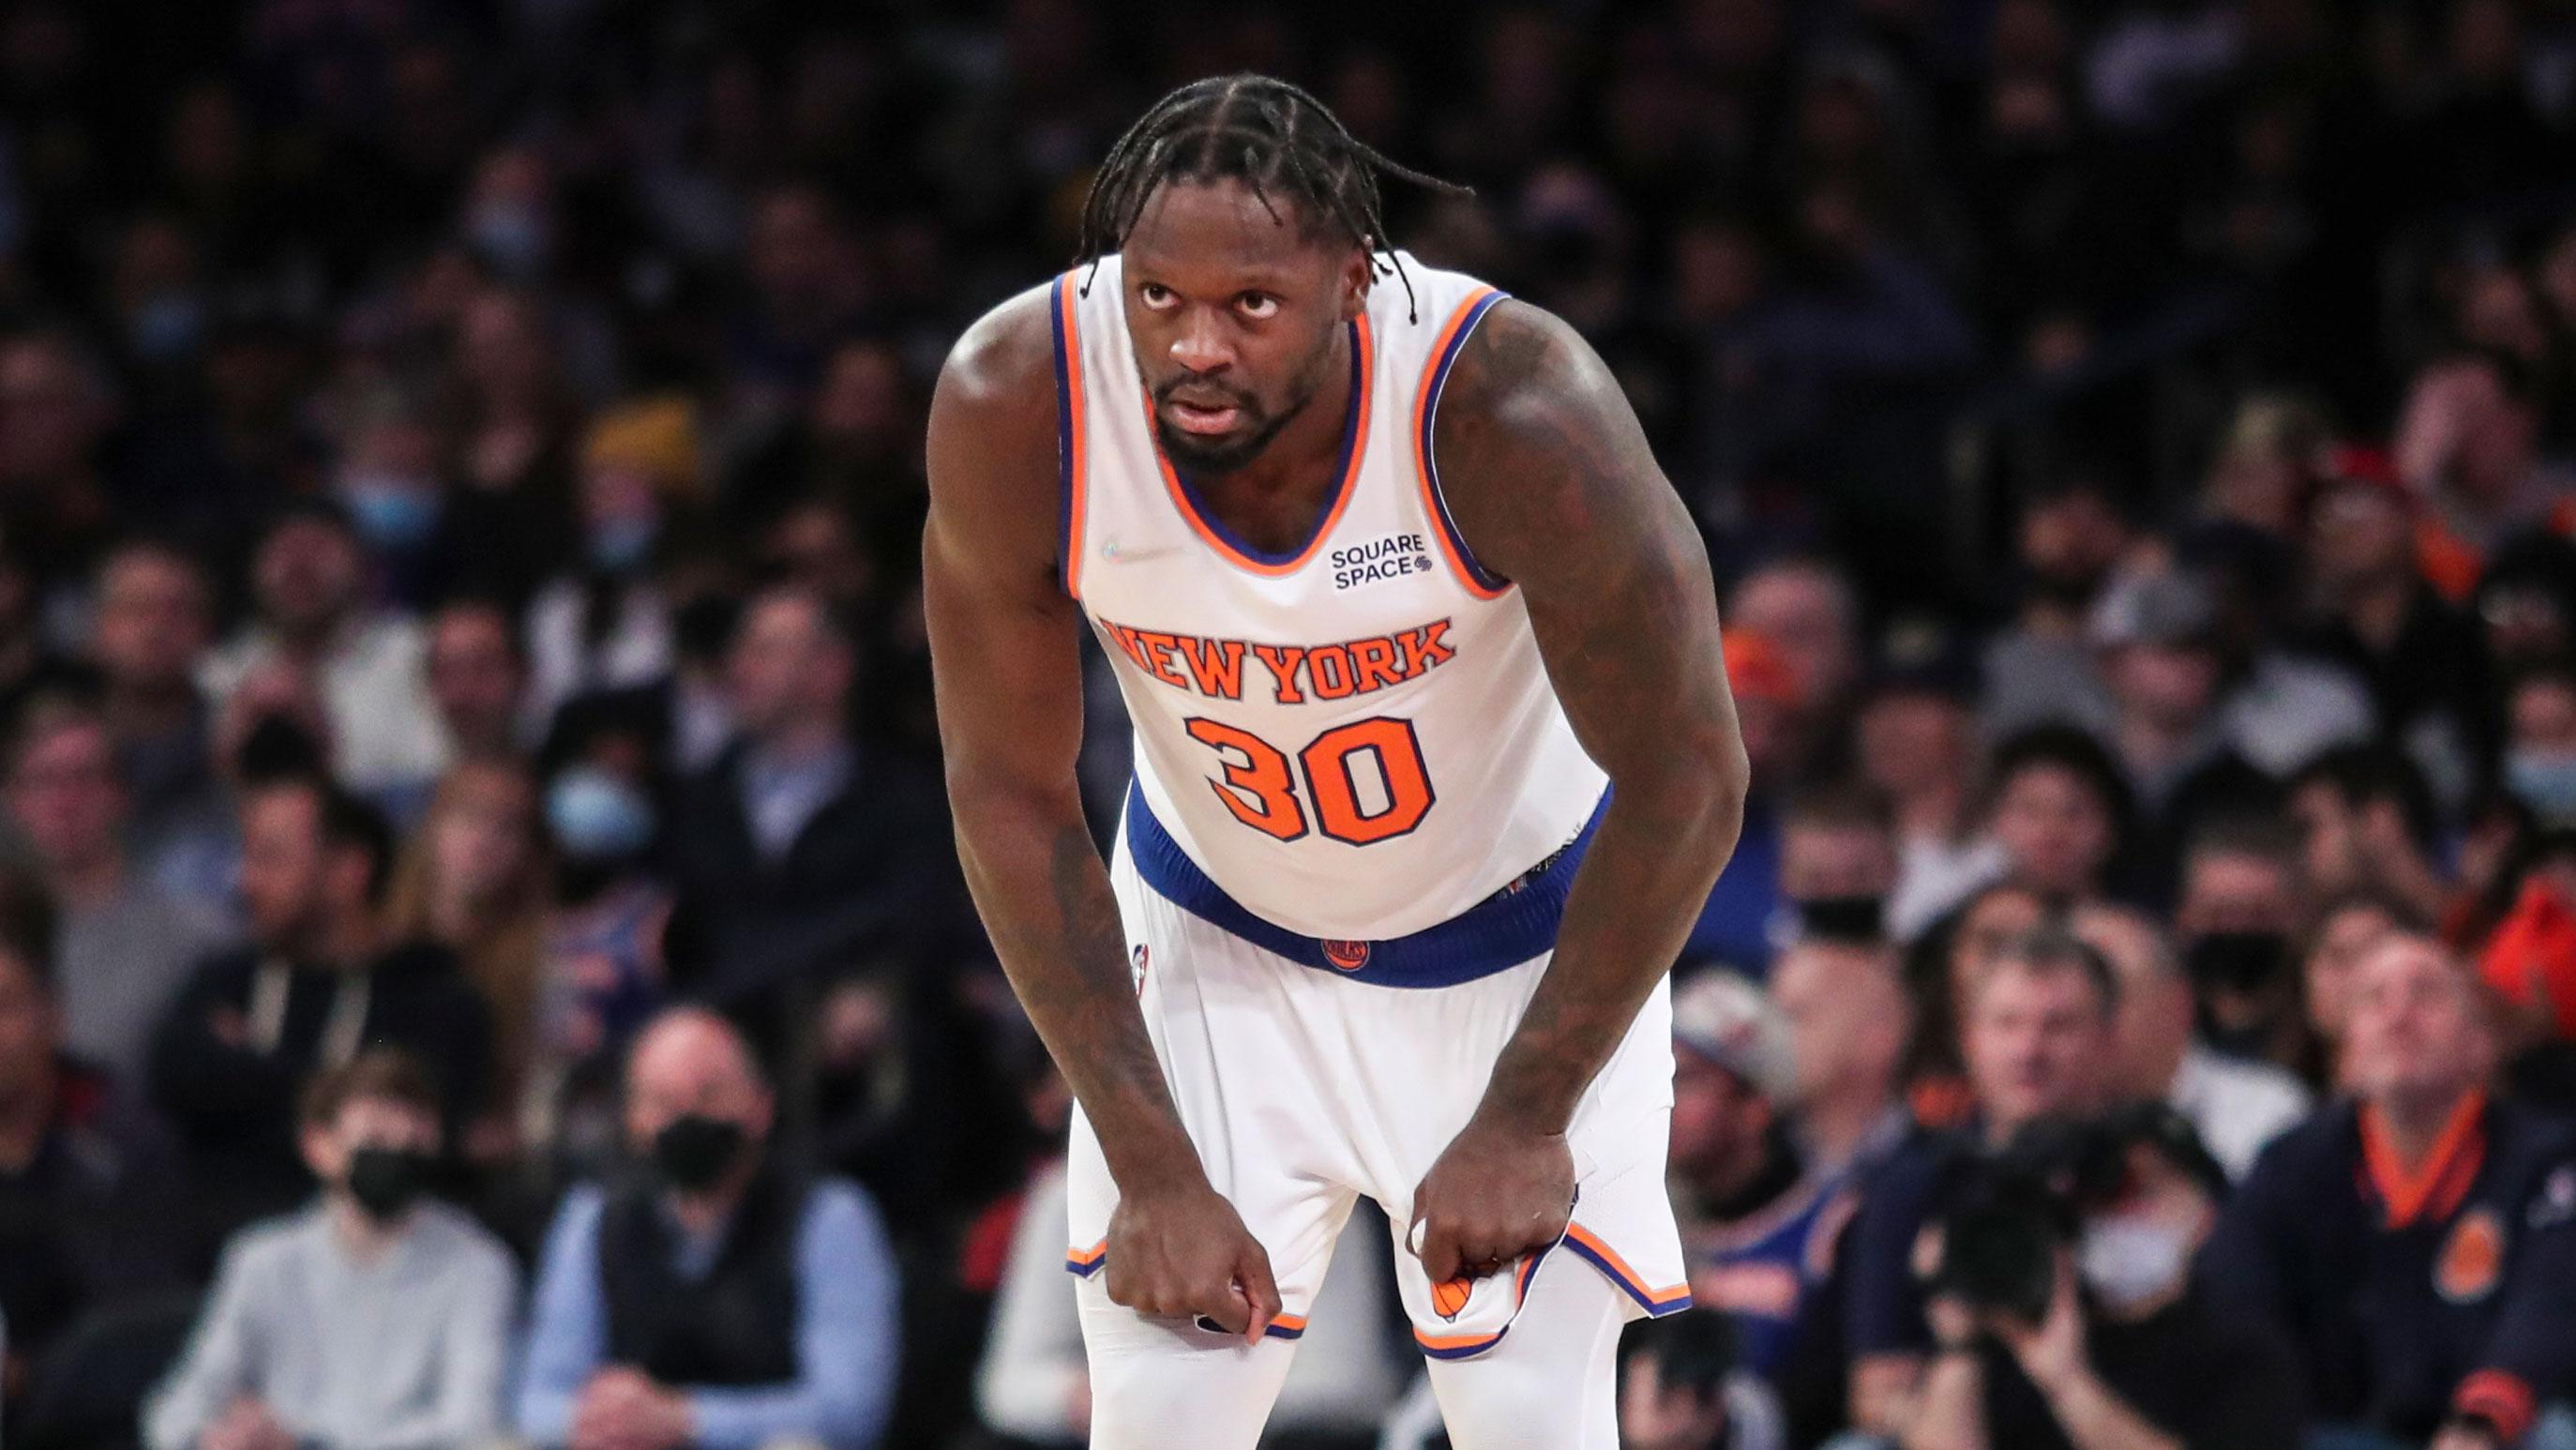 Jan 4, 2022; New York, New York, USA; New York Knicks forward Julius Randle (30) watches during a free throw attempt against the Indiana Pacers in the fourth quarter at Madison Square Garden. / Wendell Cruz-USA TODAY Sports